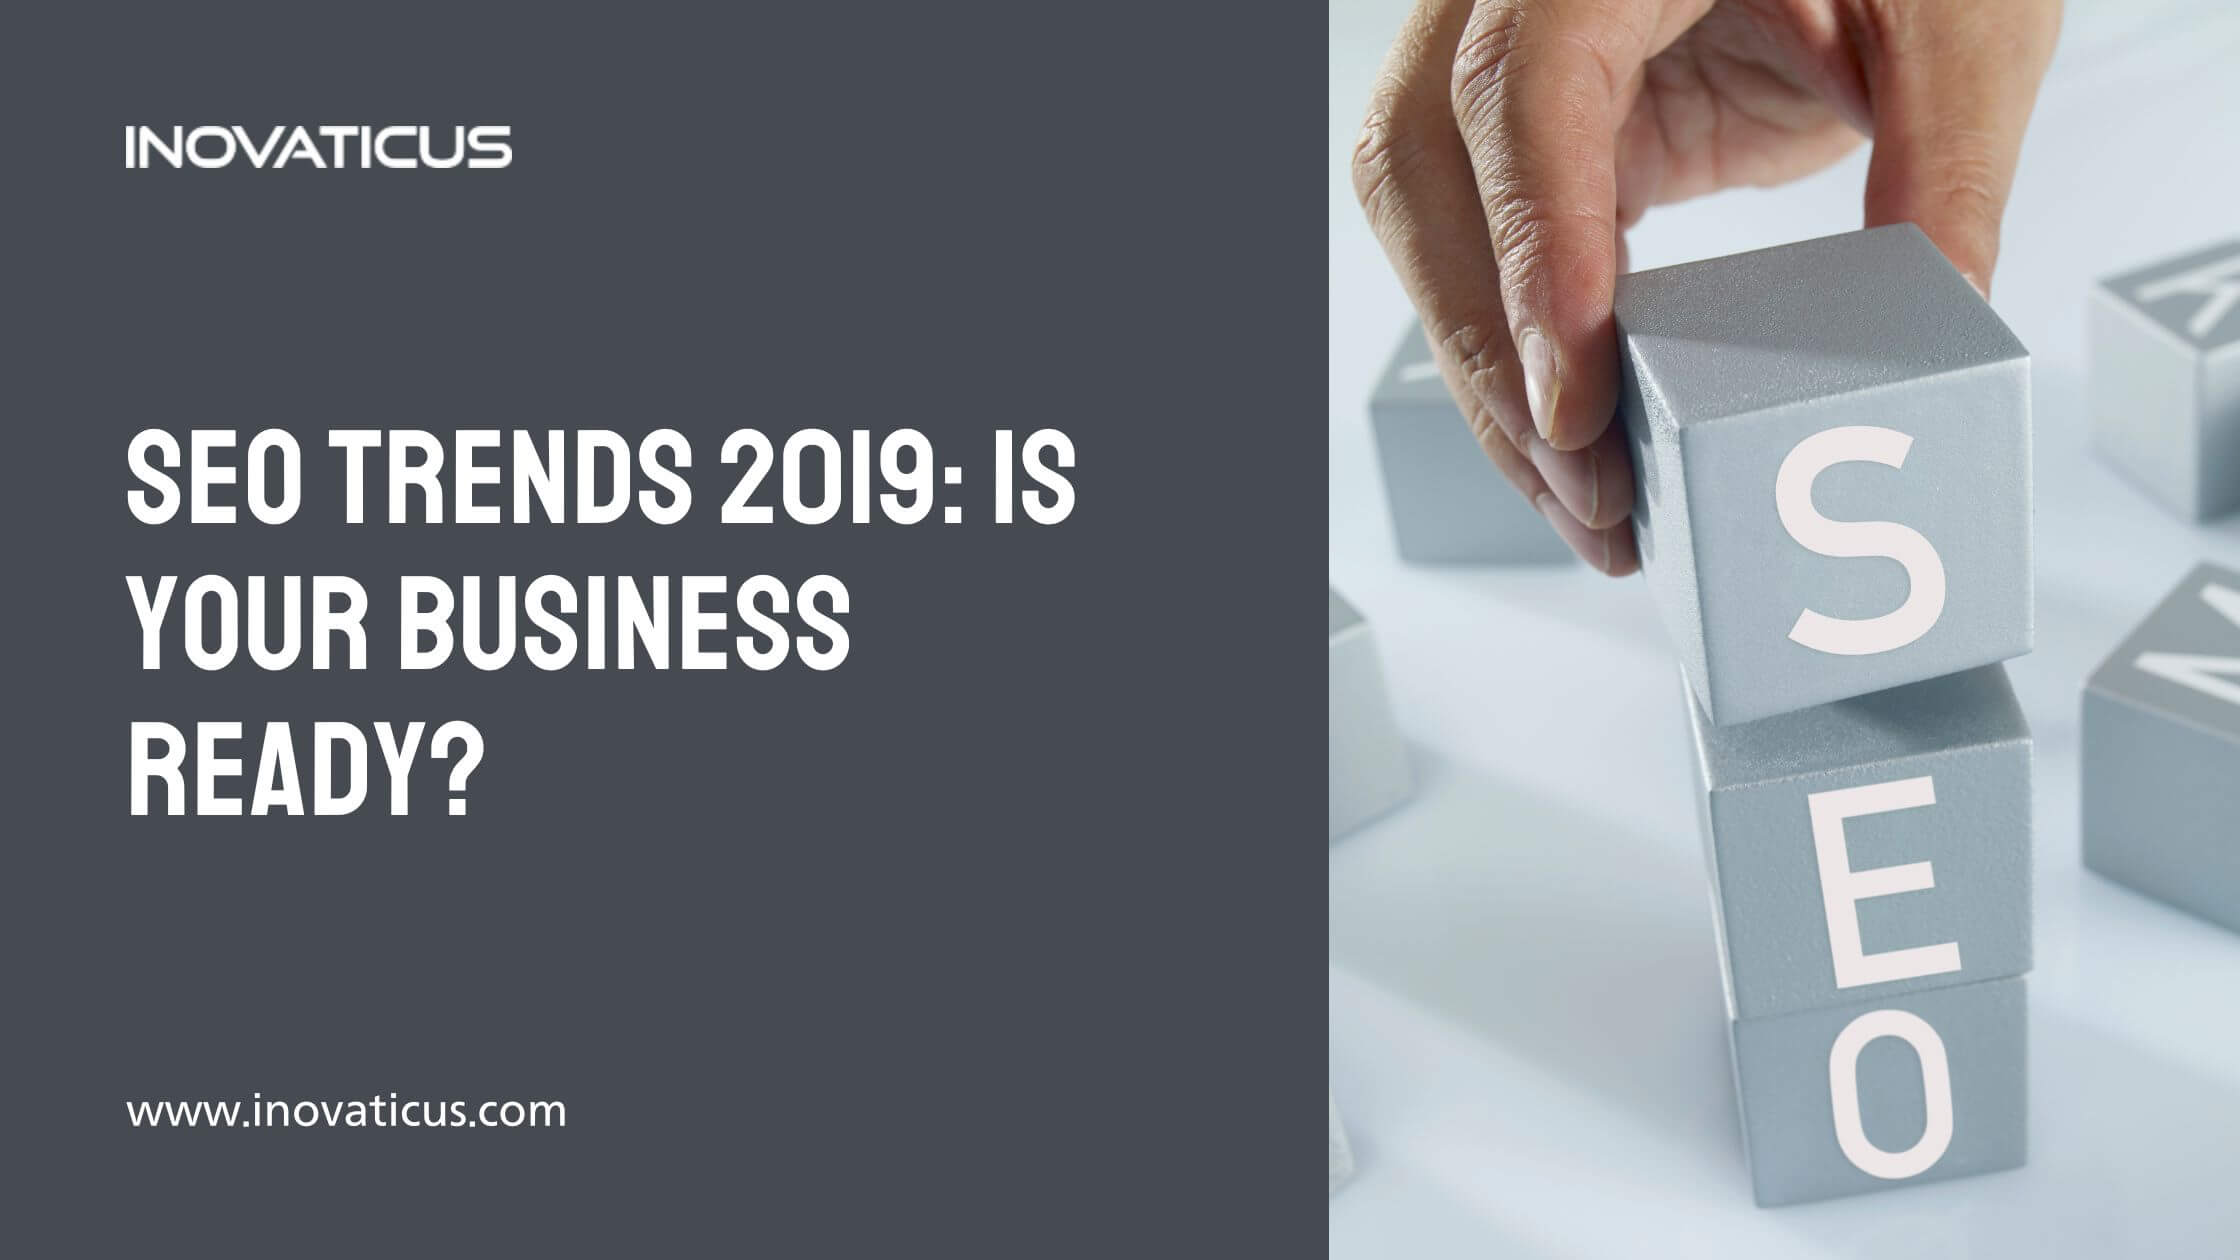 SEO Trends 2019: Is Your Business Ready?